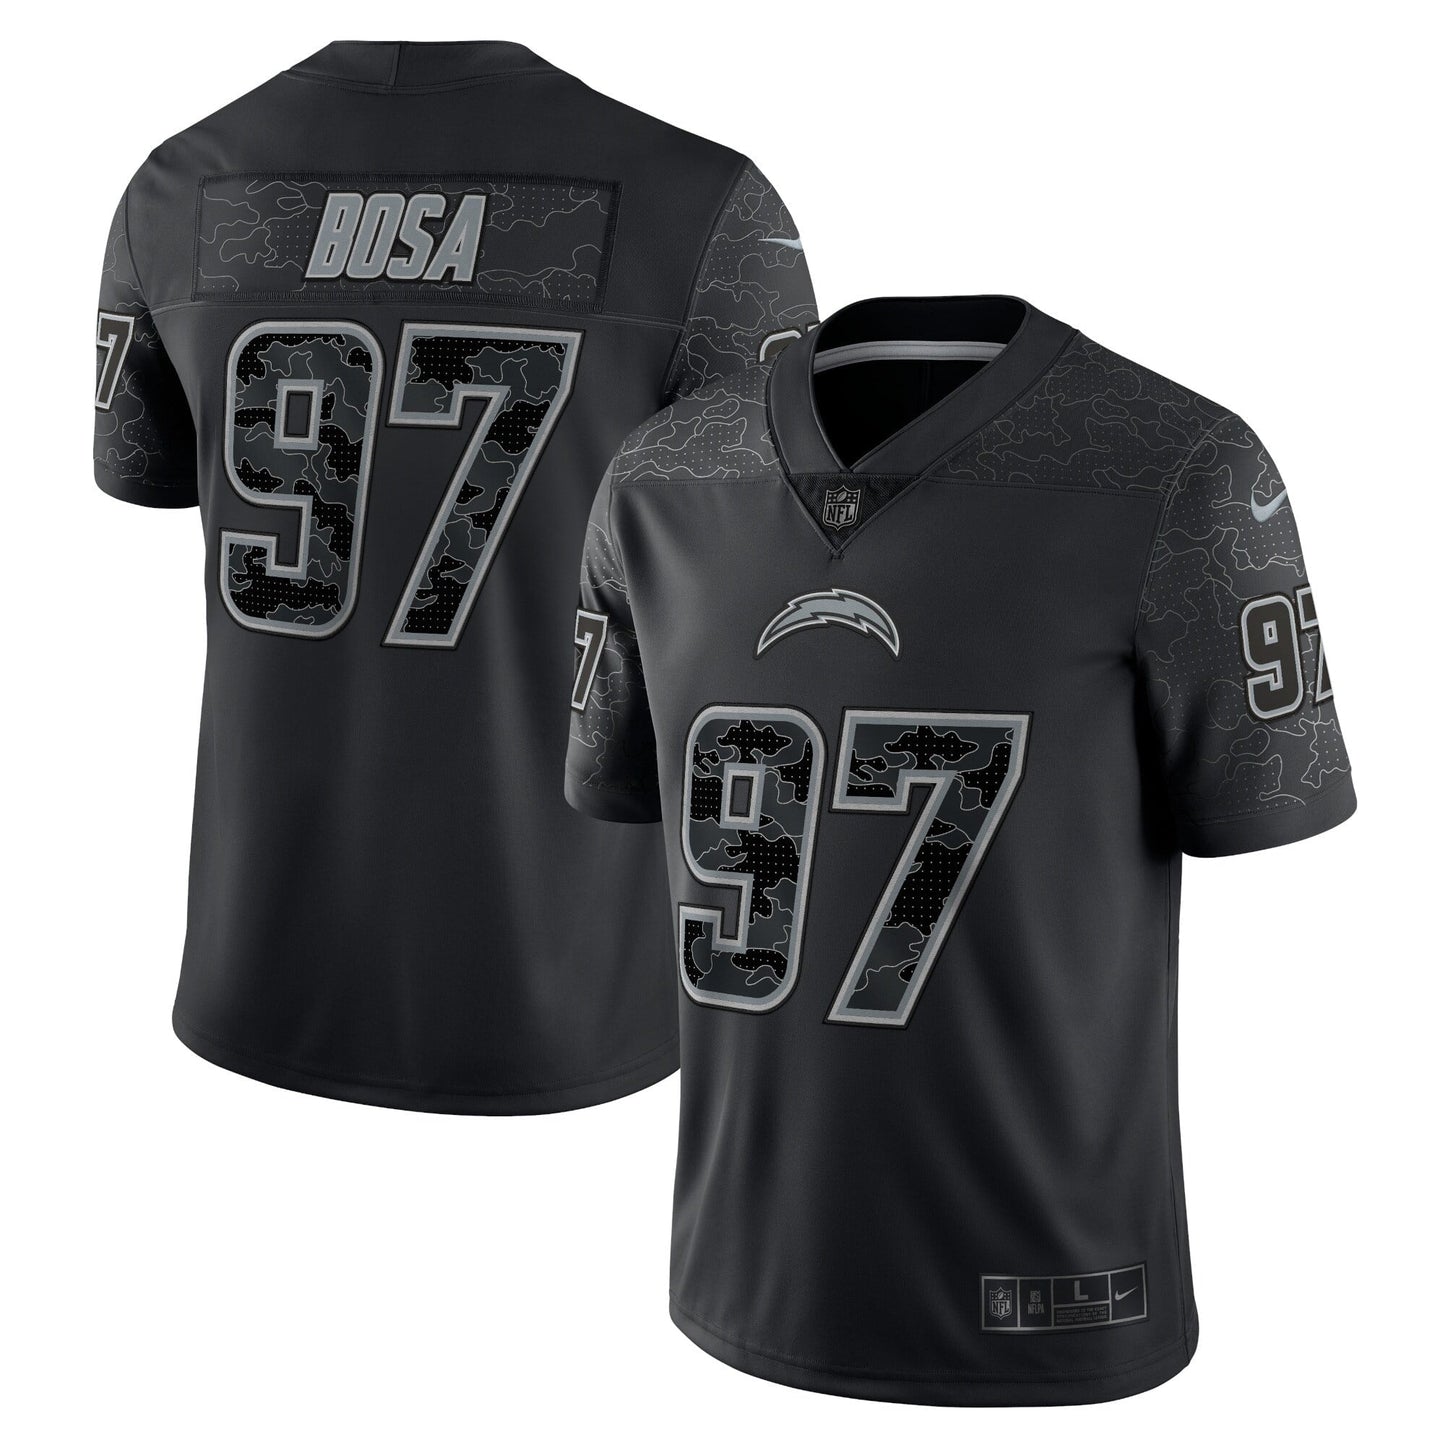 Men's Nike Joey Bosa Black Los Angeles Chargers RFLCTV Limited Jersey